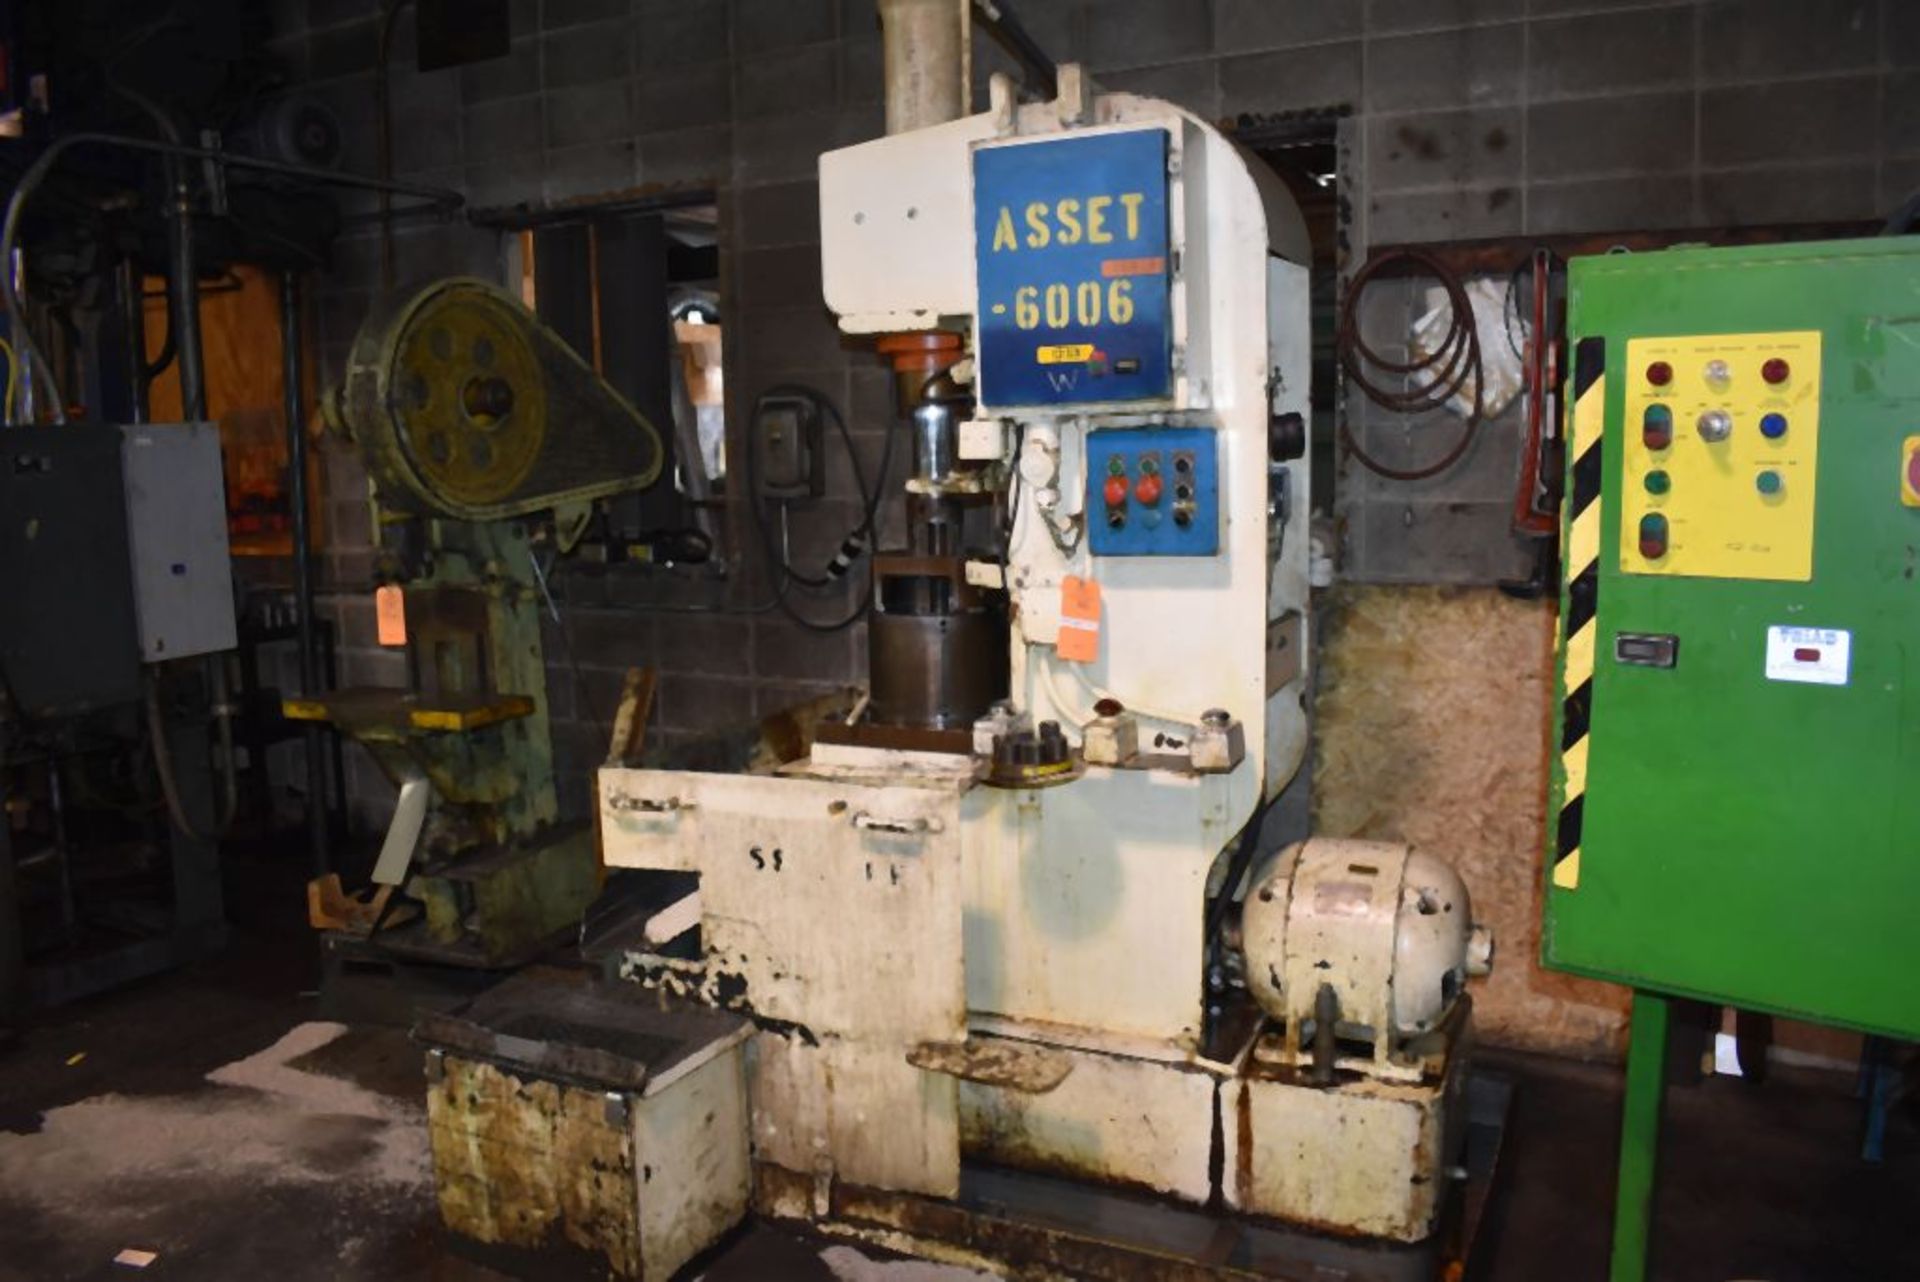 HANNIFIN HYDRAULIC PRESS, DUAL PALM BUTTONS, 12" STR., 7.5 H.P. MOTOR - Image 4 of 4